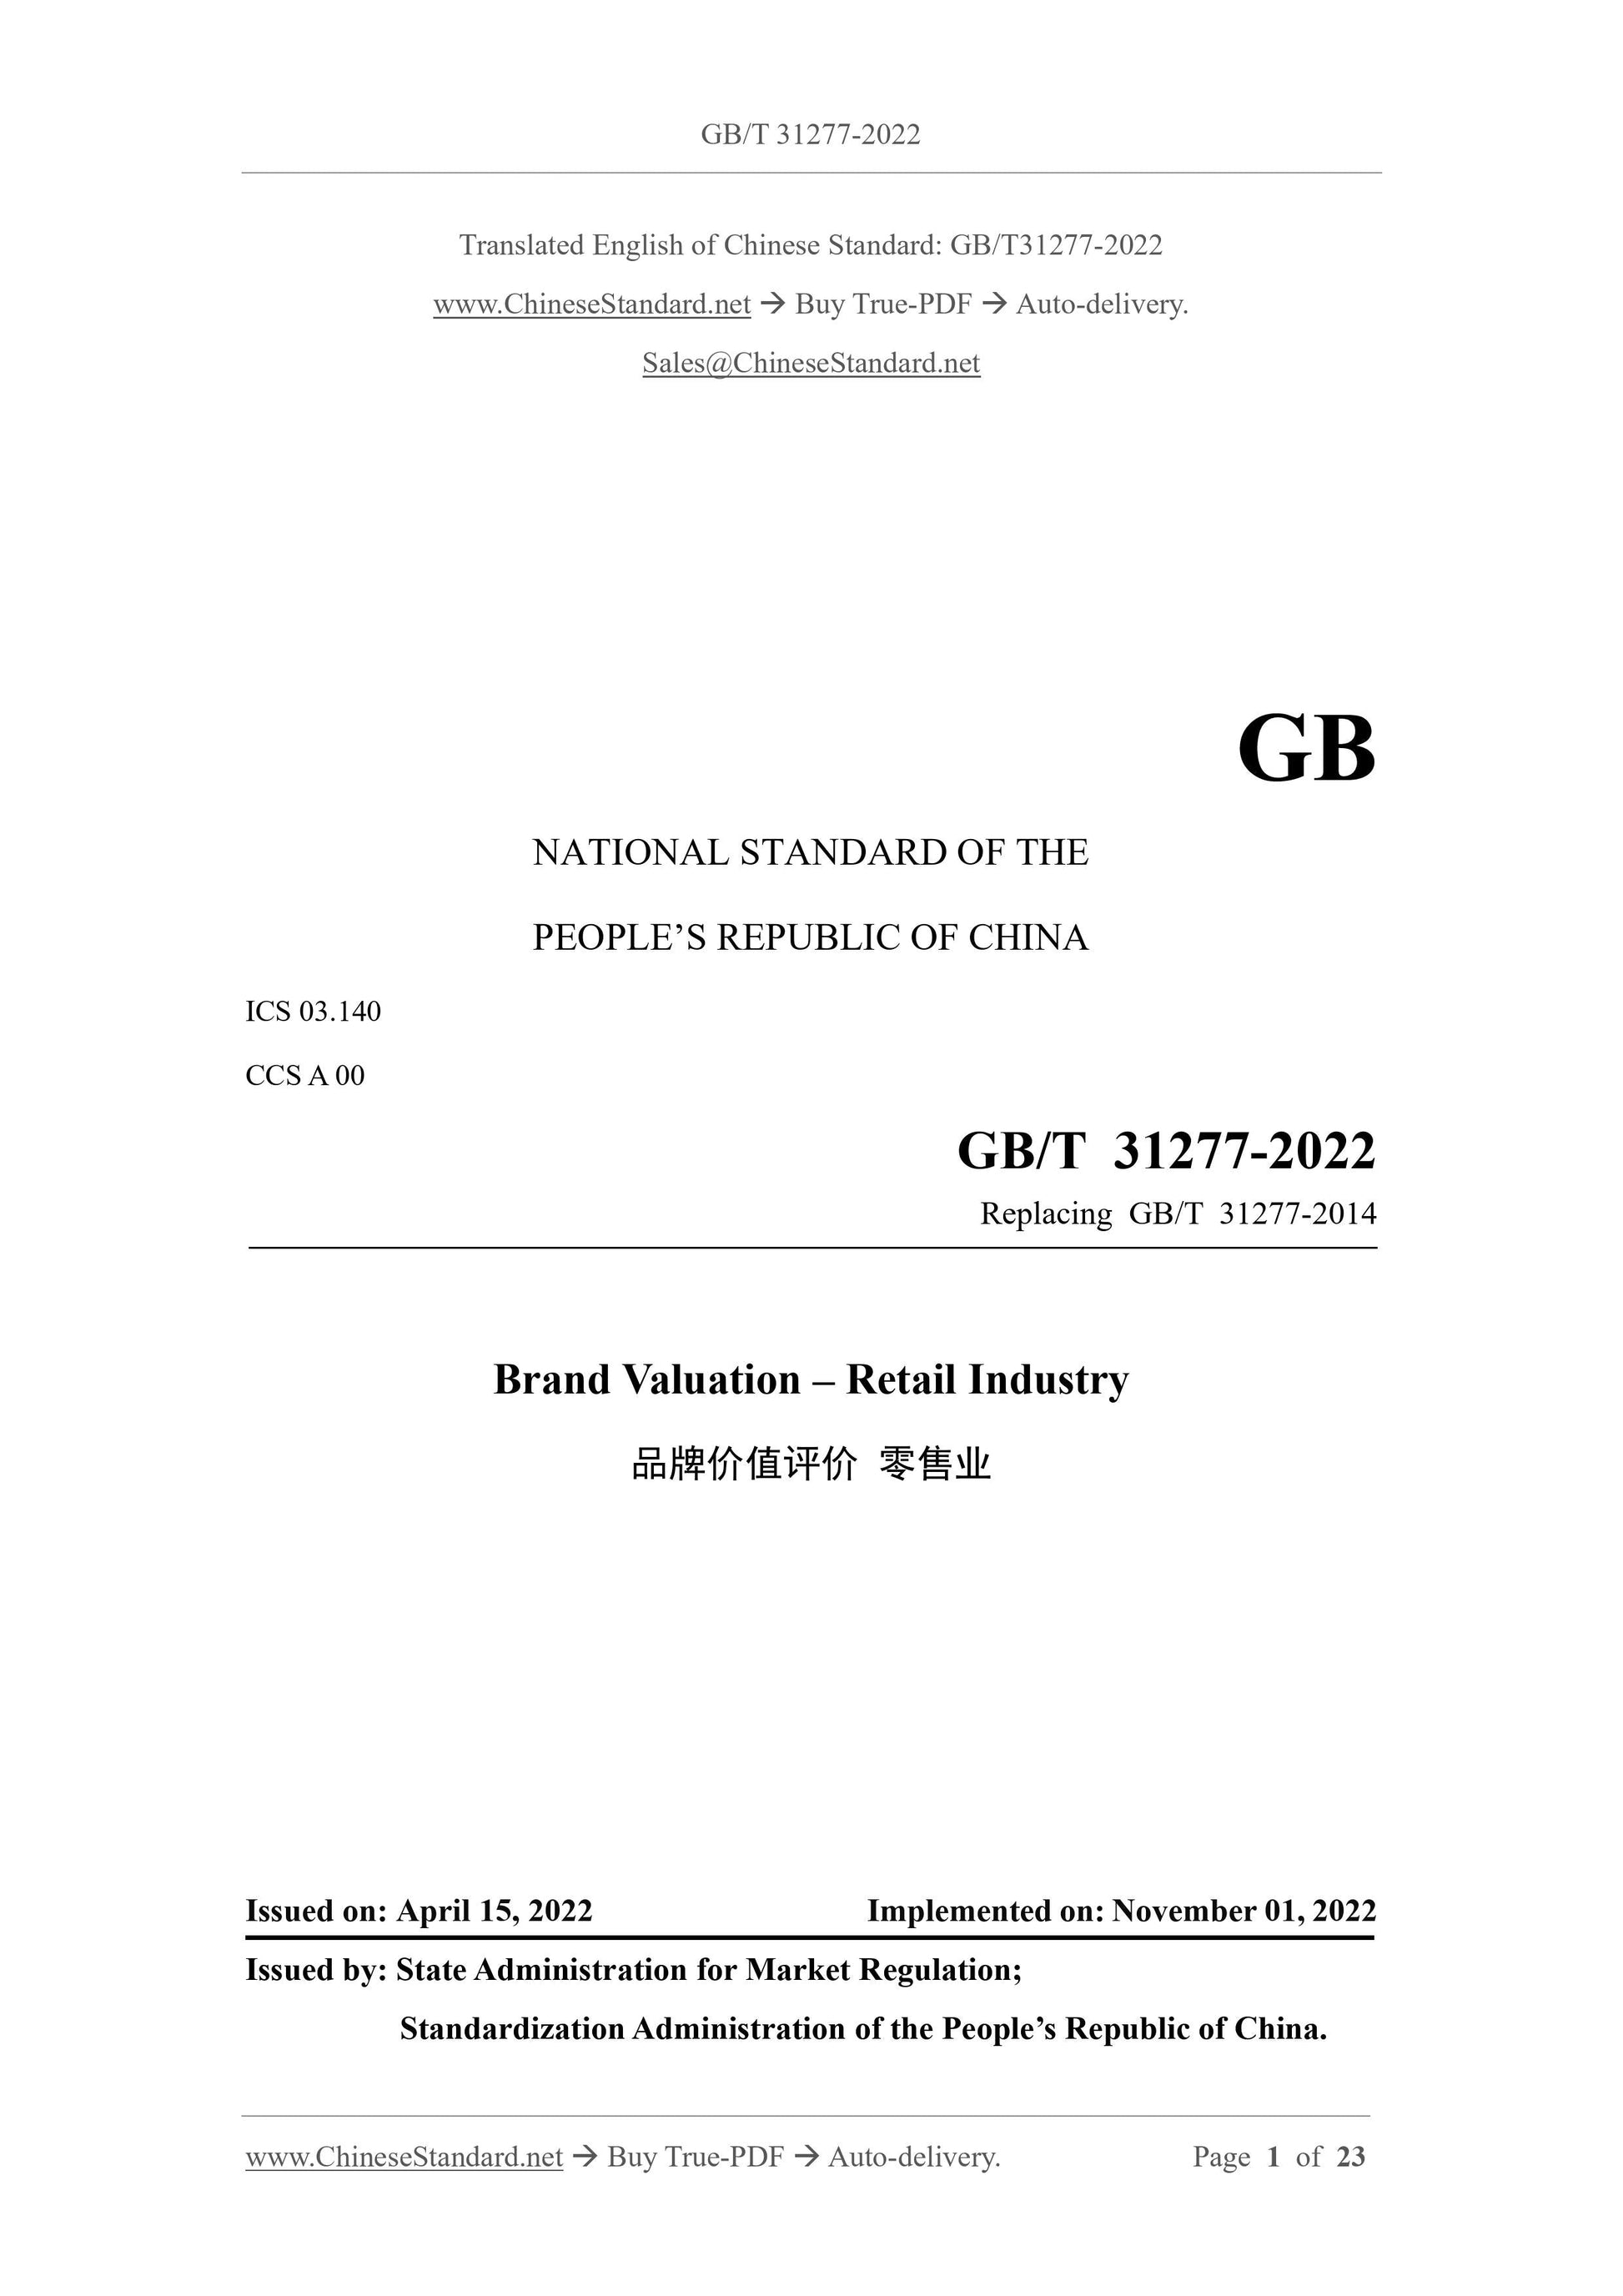 GB/T 31277-2022 Page 1